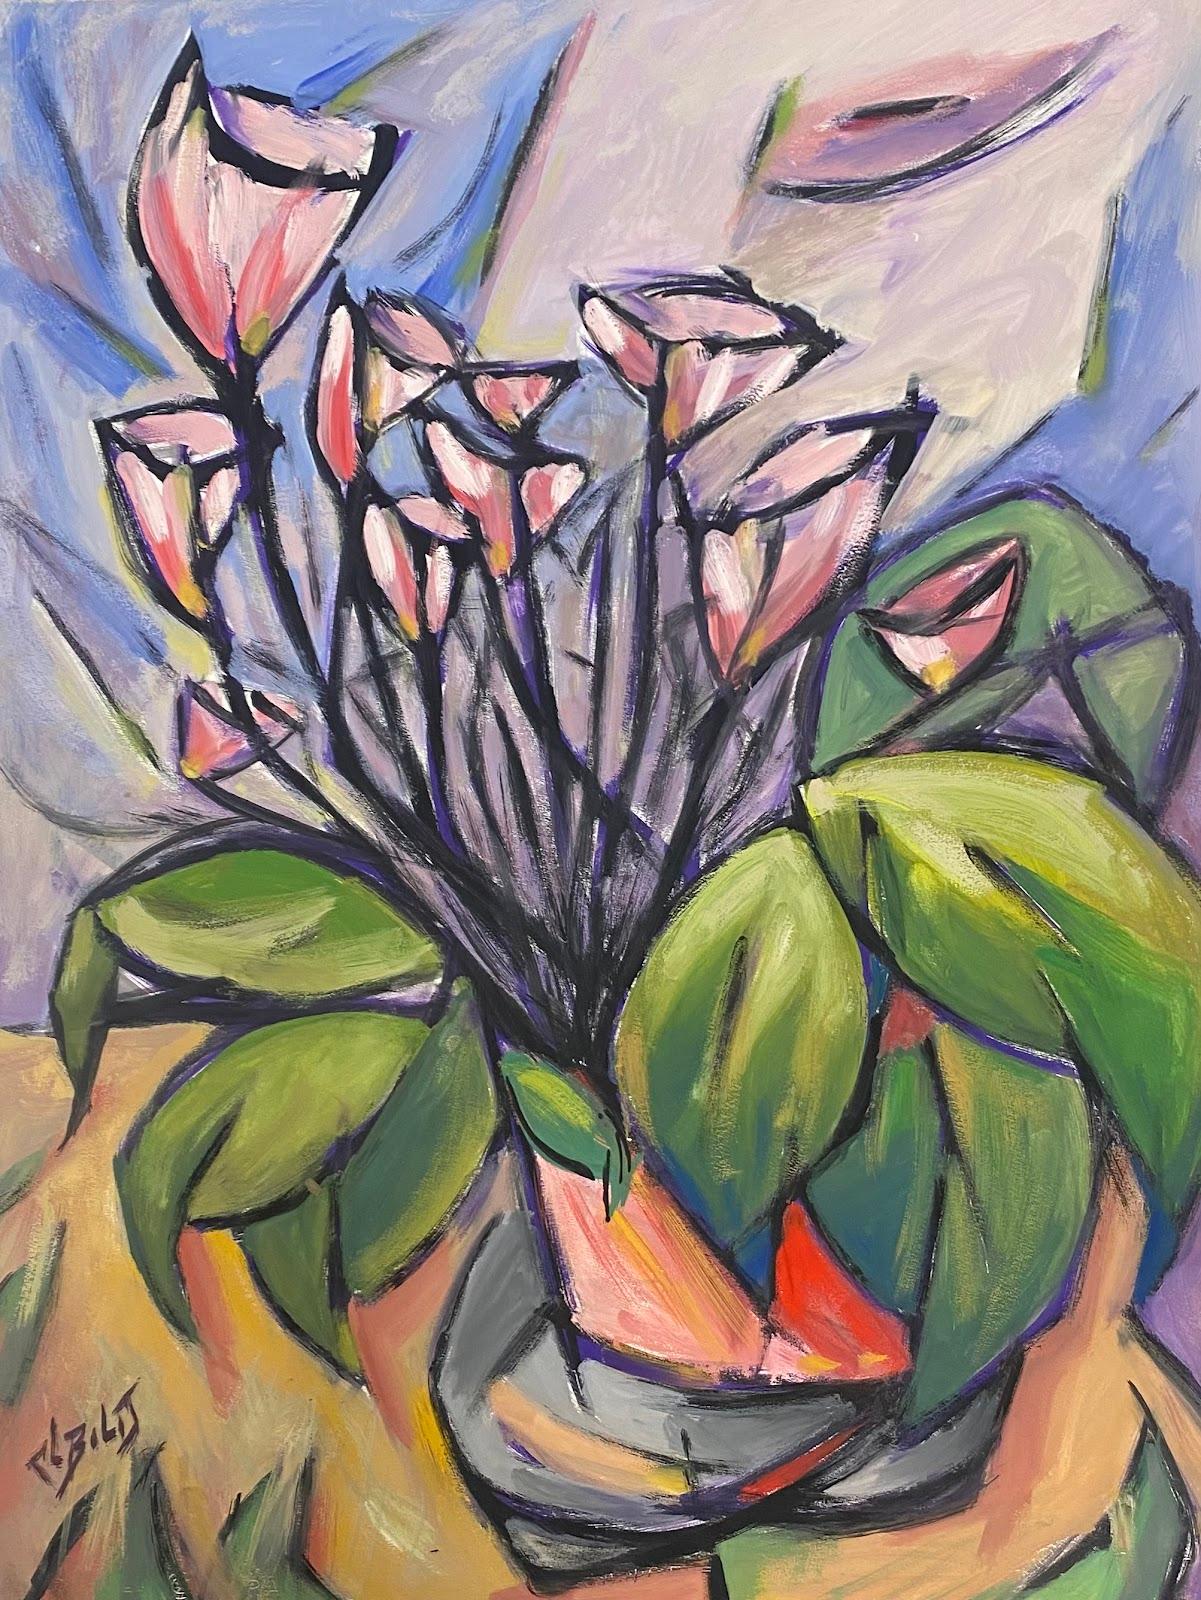 Paul-Louis Bolot (French 1918-2003) Figurative Painting - 20th Century French Cubist Styled Gouache Painting Of Pink Lilies